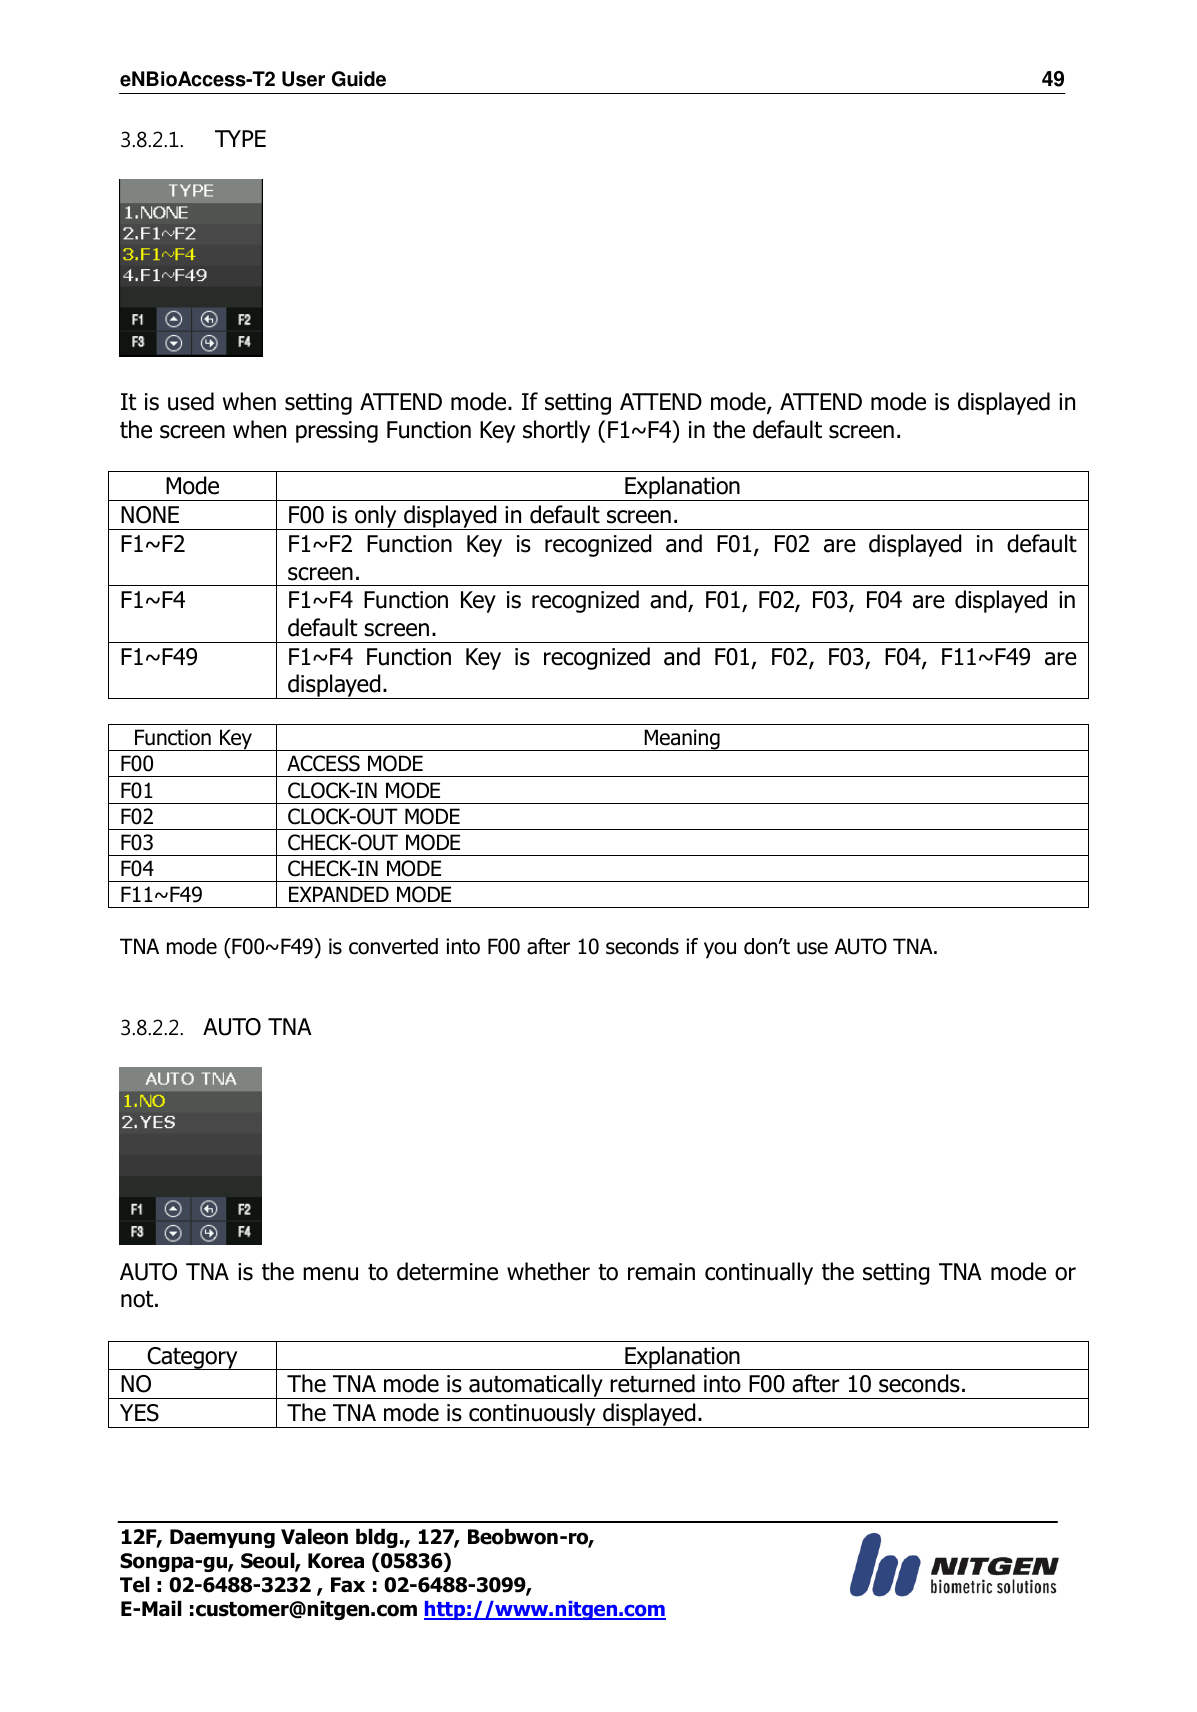 eNBioAccess-T2 User Guide                                                                    49 12F, Daemyung Valeon bldg., 127, Beobwon-ro, Songpa-gu, Seoul, Korea (05836) Tel : 02-6488-3232 , Fax : 02-6488-3099,   E-Mail :customer@nitgen.com http://www.nitgen.com  3.8.2.1.   TYPE    It is used when setting ATTEND mode. If setting ATTEND mode, ATTEND mode is displayed in the screen when pressing Function Key shortly (F1~F4) in the default screen.  Mode Explanation NONE F00 is only displayed in default screen. F1~F2 F1~F2  Function  Key  is  recognized  and  F01,  F02  are  displayed  in  default screen. F1~F4 F1~F4 Function Key is recognized and, F01, F02, F03,  F04  are  displayed in default screen. F1~F49 F1~F4  Function  Key  is  recognized  and  F01,  F02,  F03,  F04,  F11~F49  are displayed.  Function Key Meaning F00 ACCESS MODE F01 CLOCK-IN MODE F02 CLOCK-OUT MODE F03 CHECK-OUT MODE F04 CHECK-IN MODE F11~F49 EXPANDED MODE  TNA mode (F00~F49) is converted into F00 after 10 seconds if you don’t use AUTO TNA.   3.8.2.2. AUTO TNA   AUTO TNA is the menu to determine whether to remain continually the setting TNA mode or not.  Category Explanation NO The TNA mode is automatically returned into F00 after 10 seconds. YES The TNA mode is continuously displayed.   